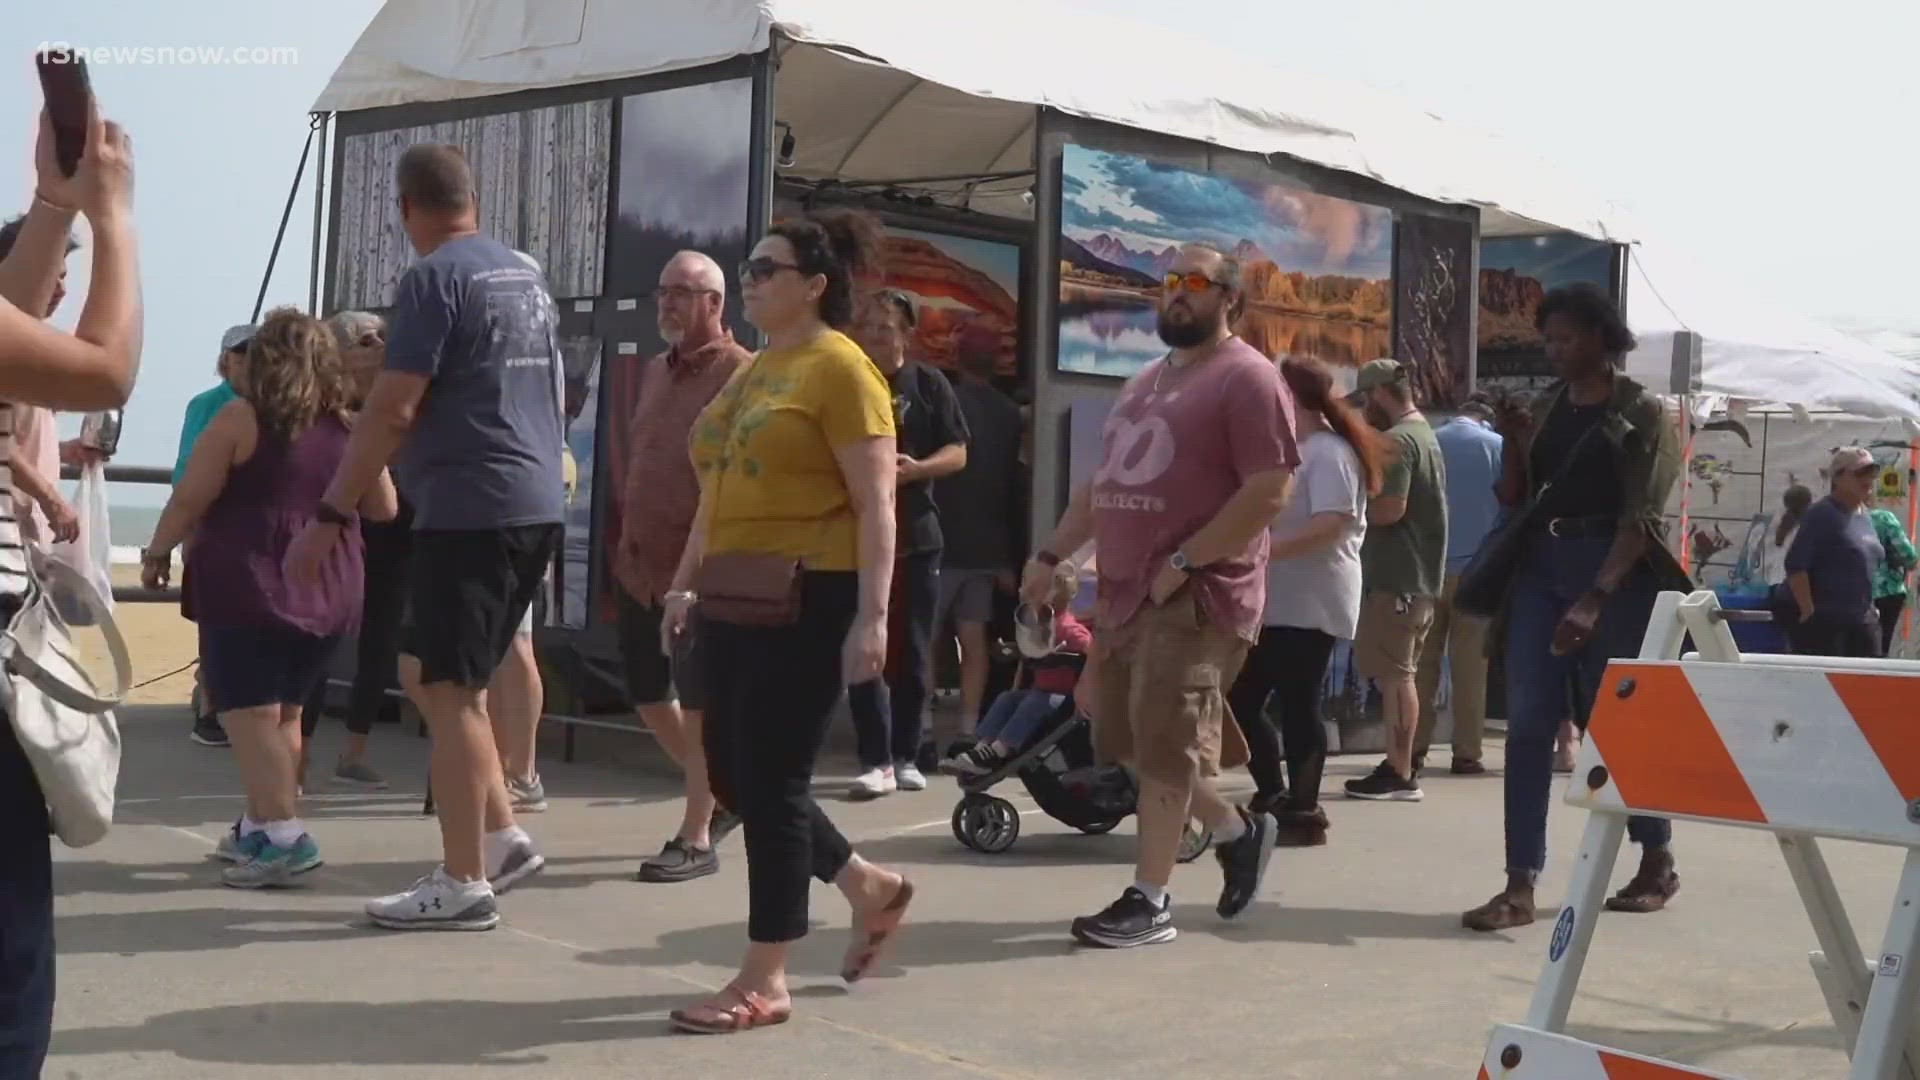 The festival returned to Virginia Beach this weekend after it was canceled last year.